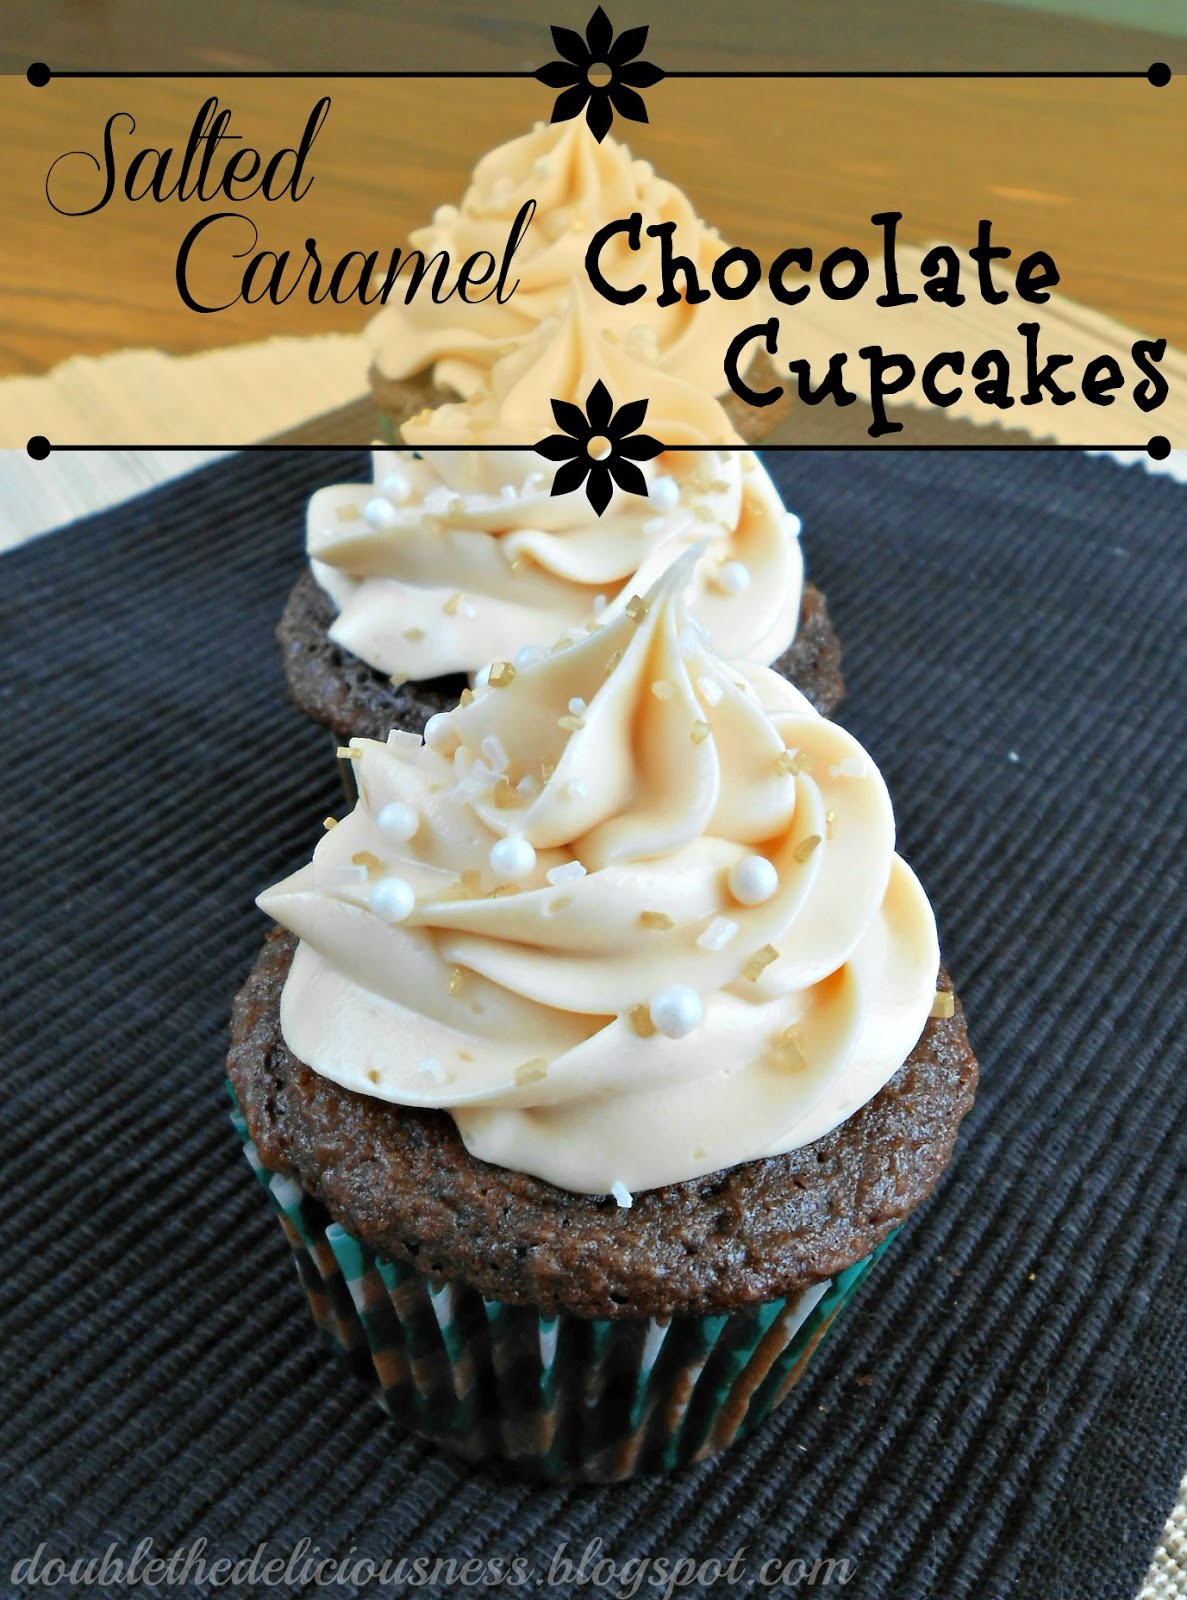 Double the Deliciousness: Salted Caramel Chocolate Cupcakes